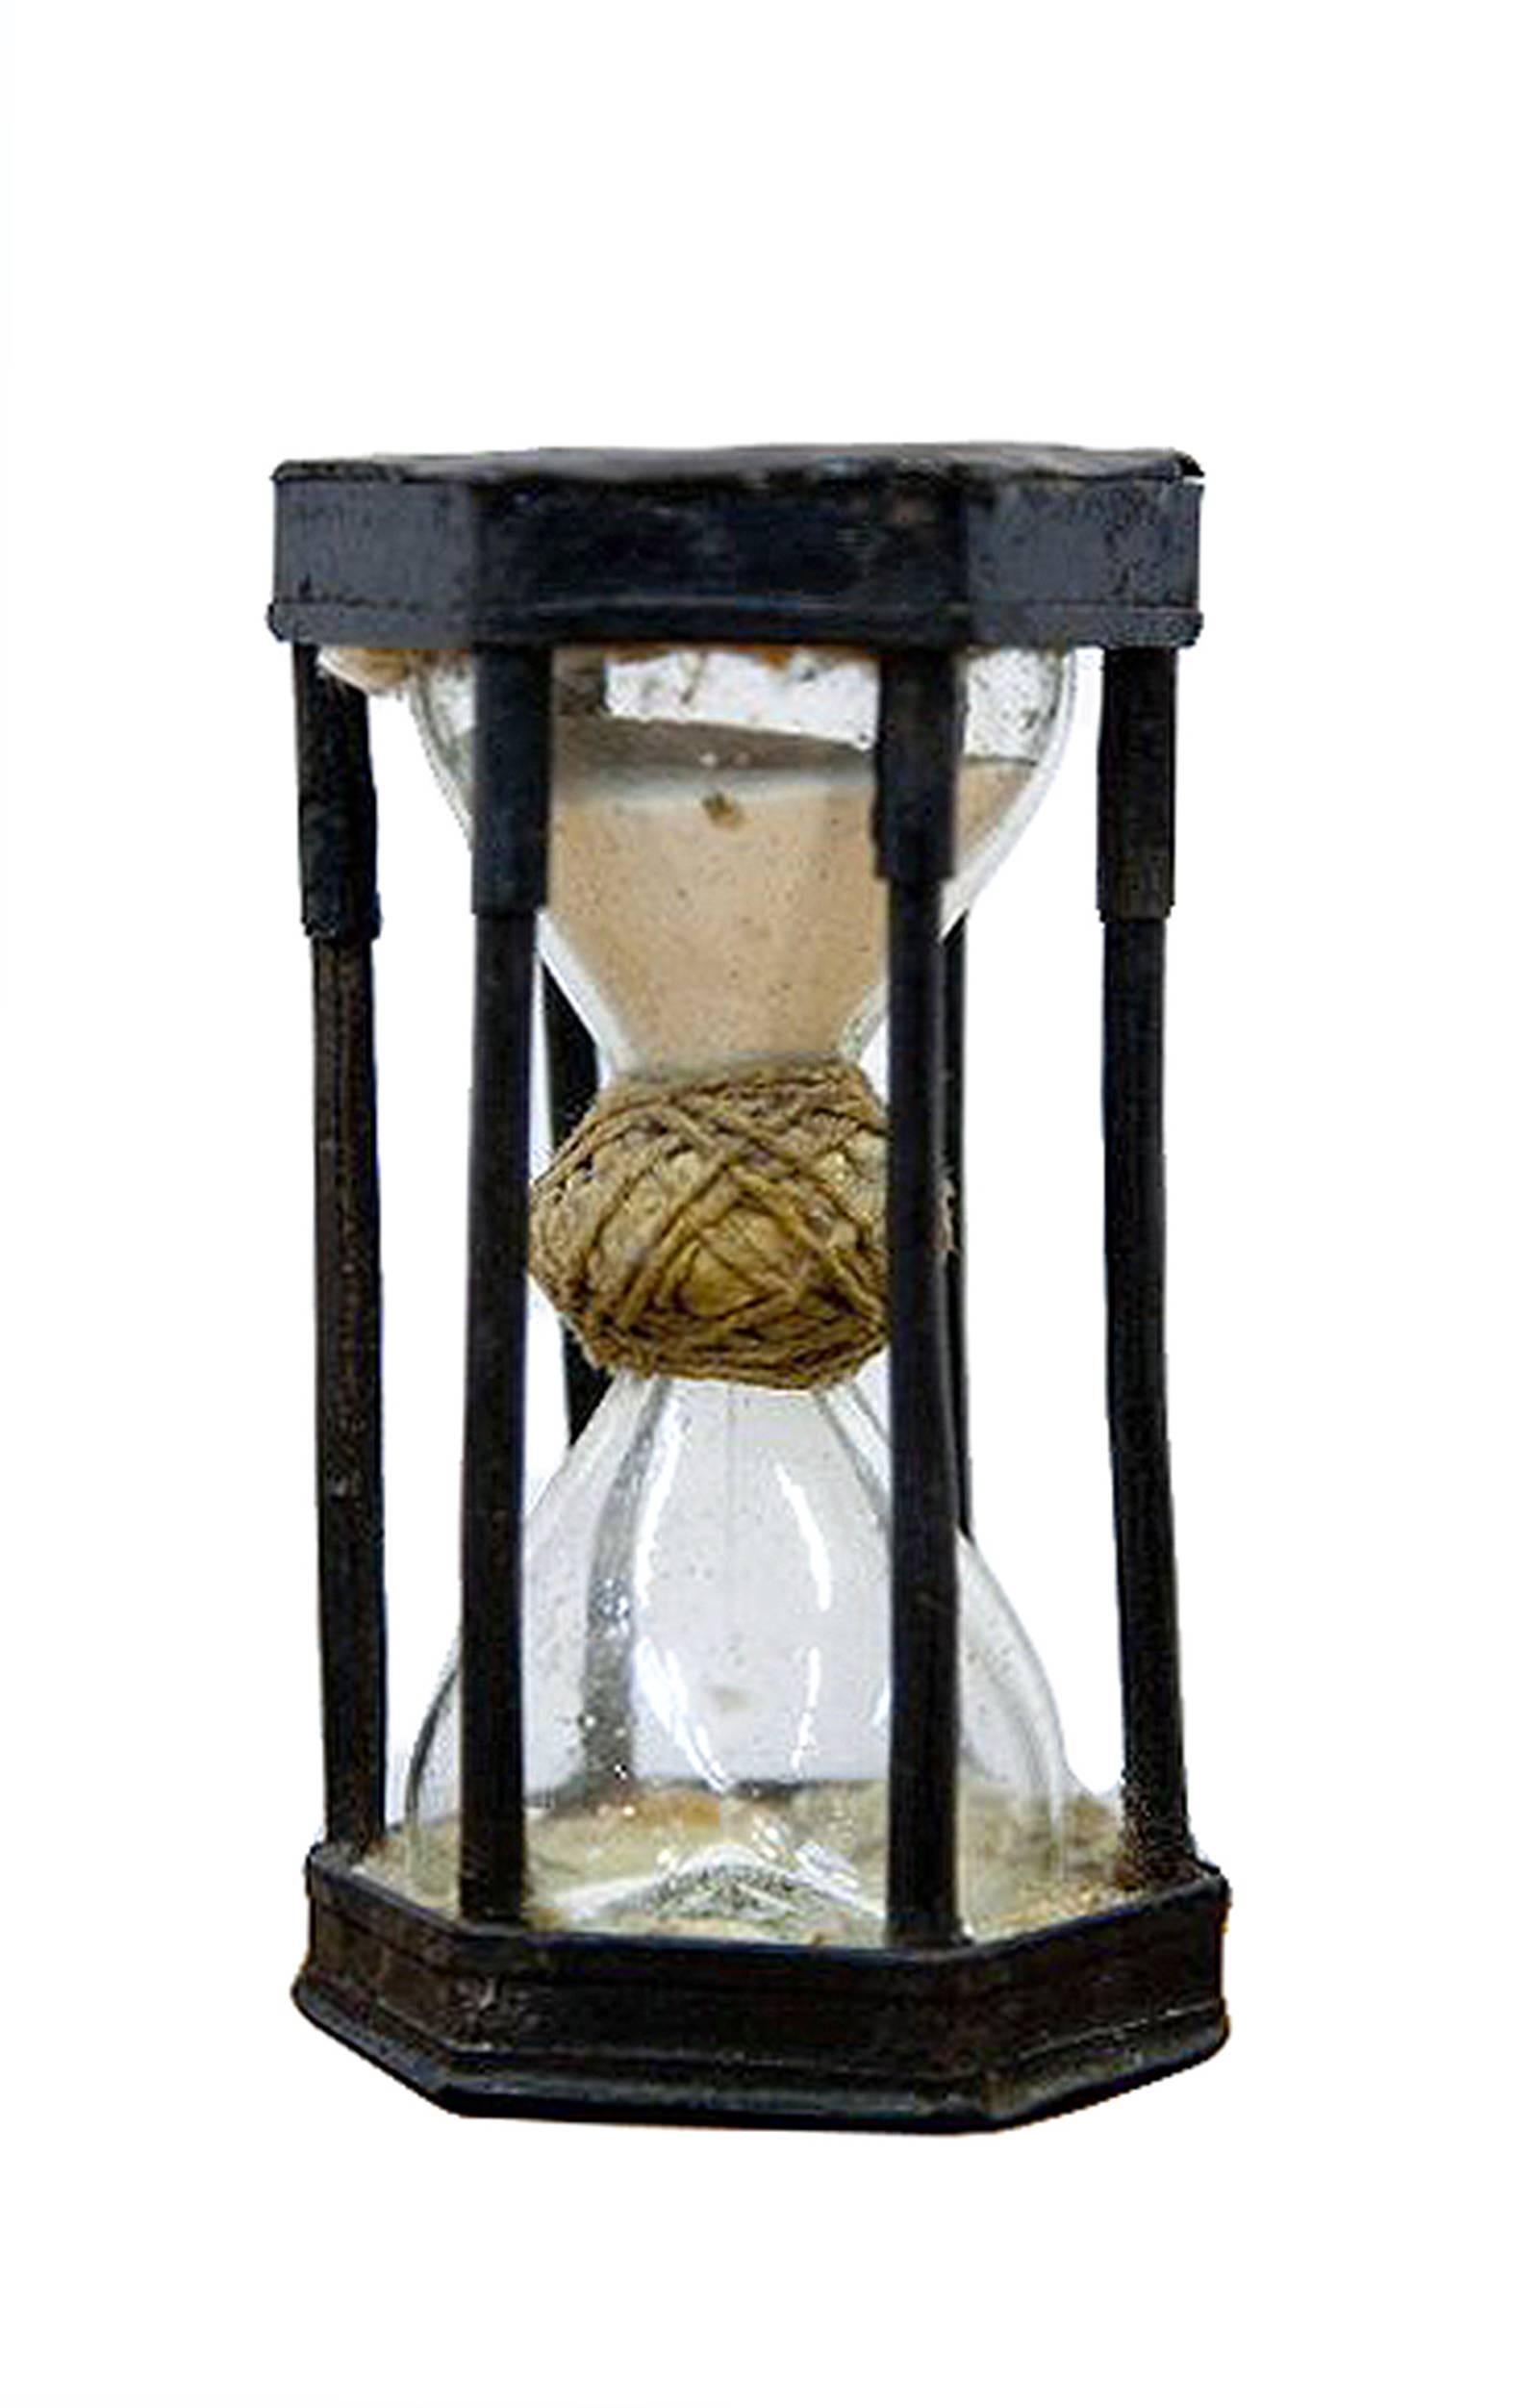 Berlin Iron Extremely Rare German Iron Caged Hourglass, circa 1720